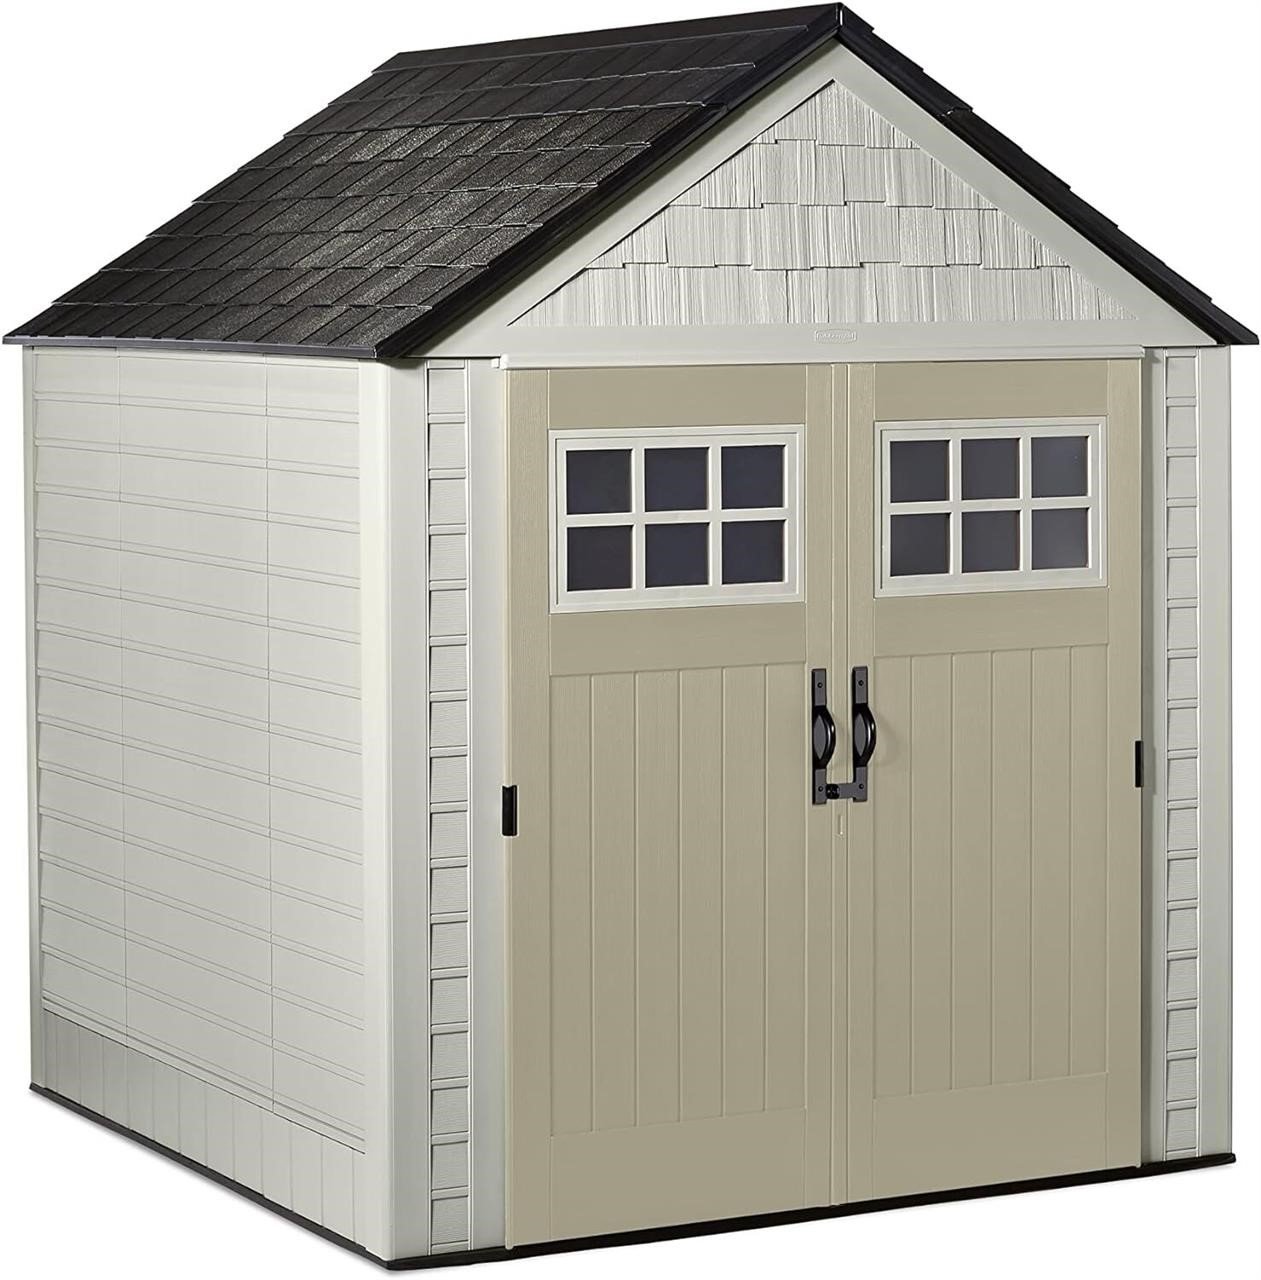 Rubbermaid 7x7' Resin Shed  Sandstone